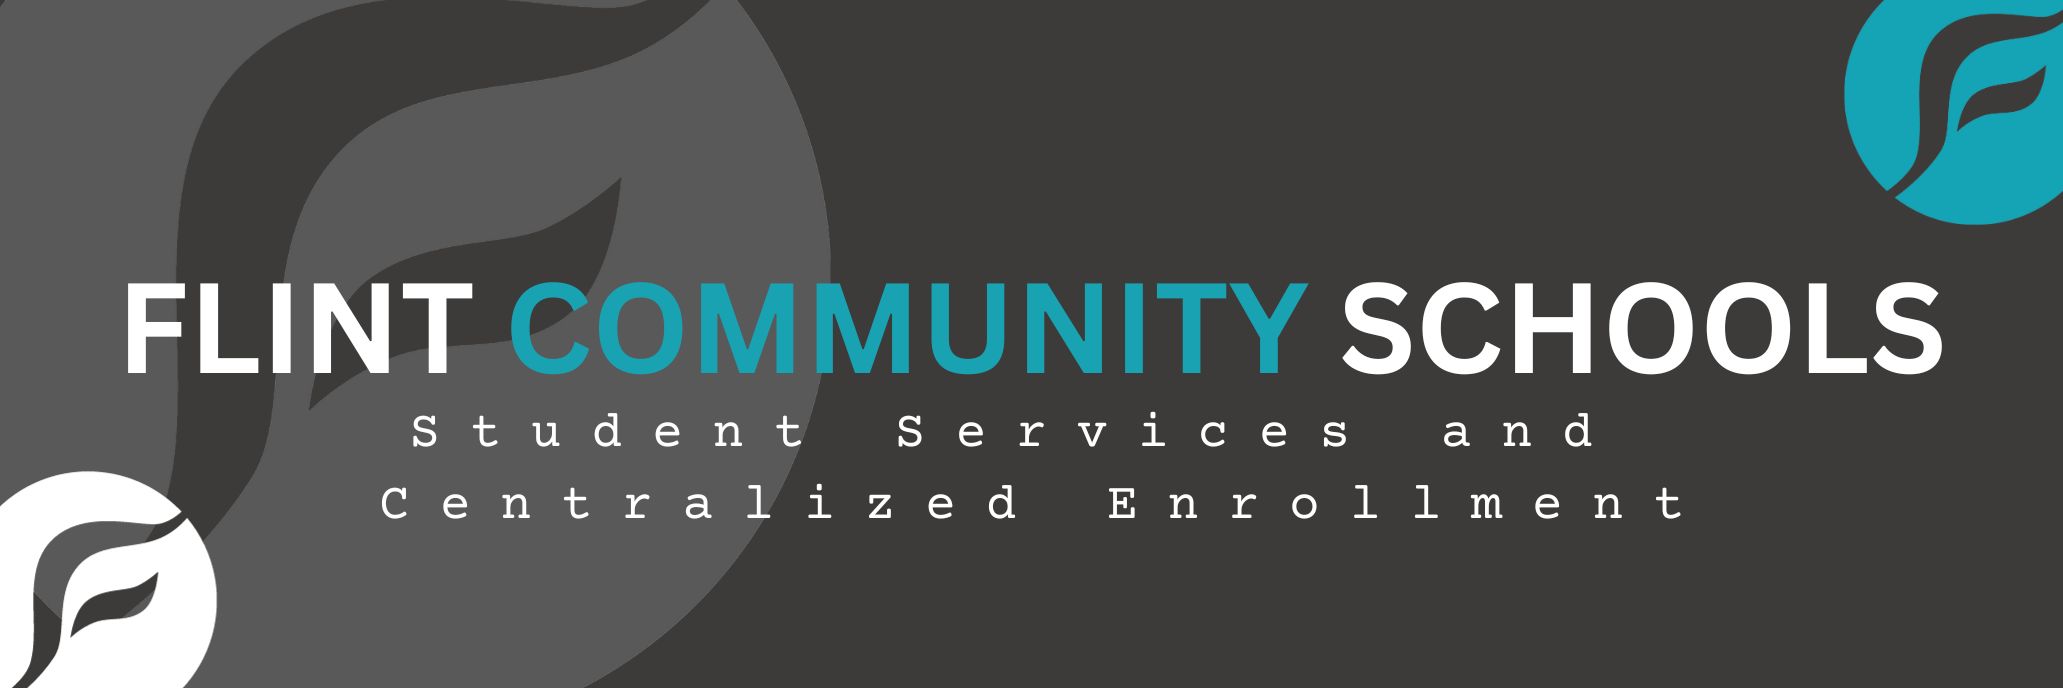 Flint Community Schools Student Services and Centralized Enrollment Banner